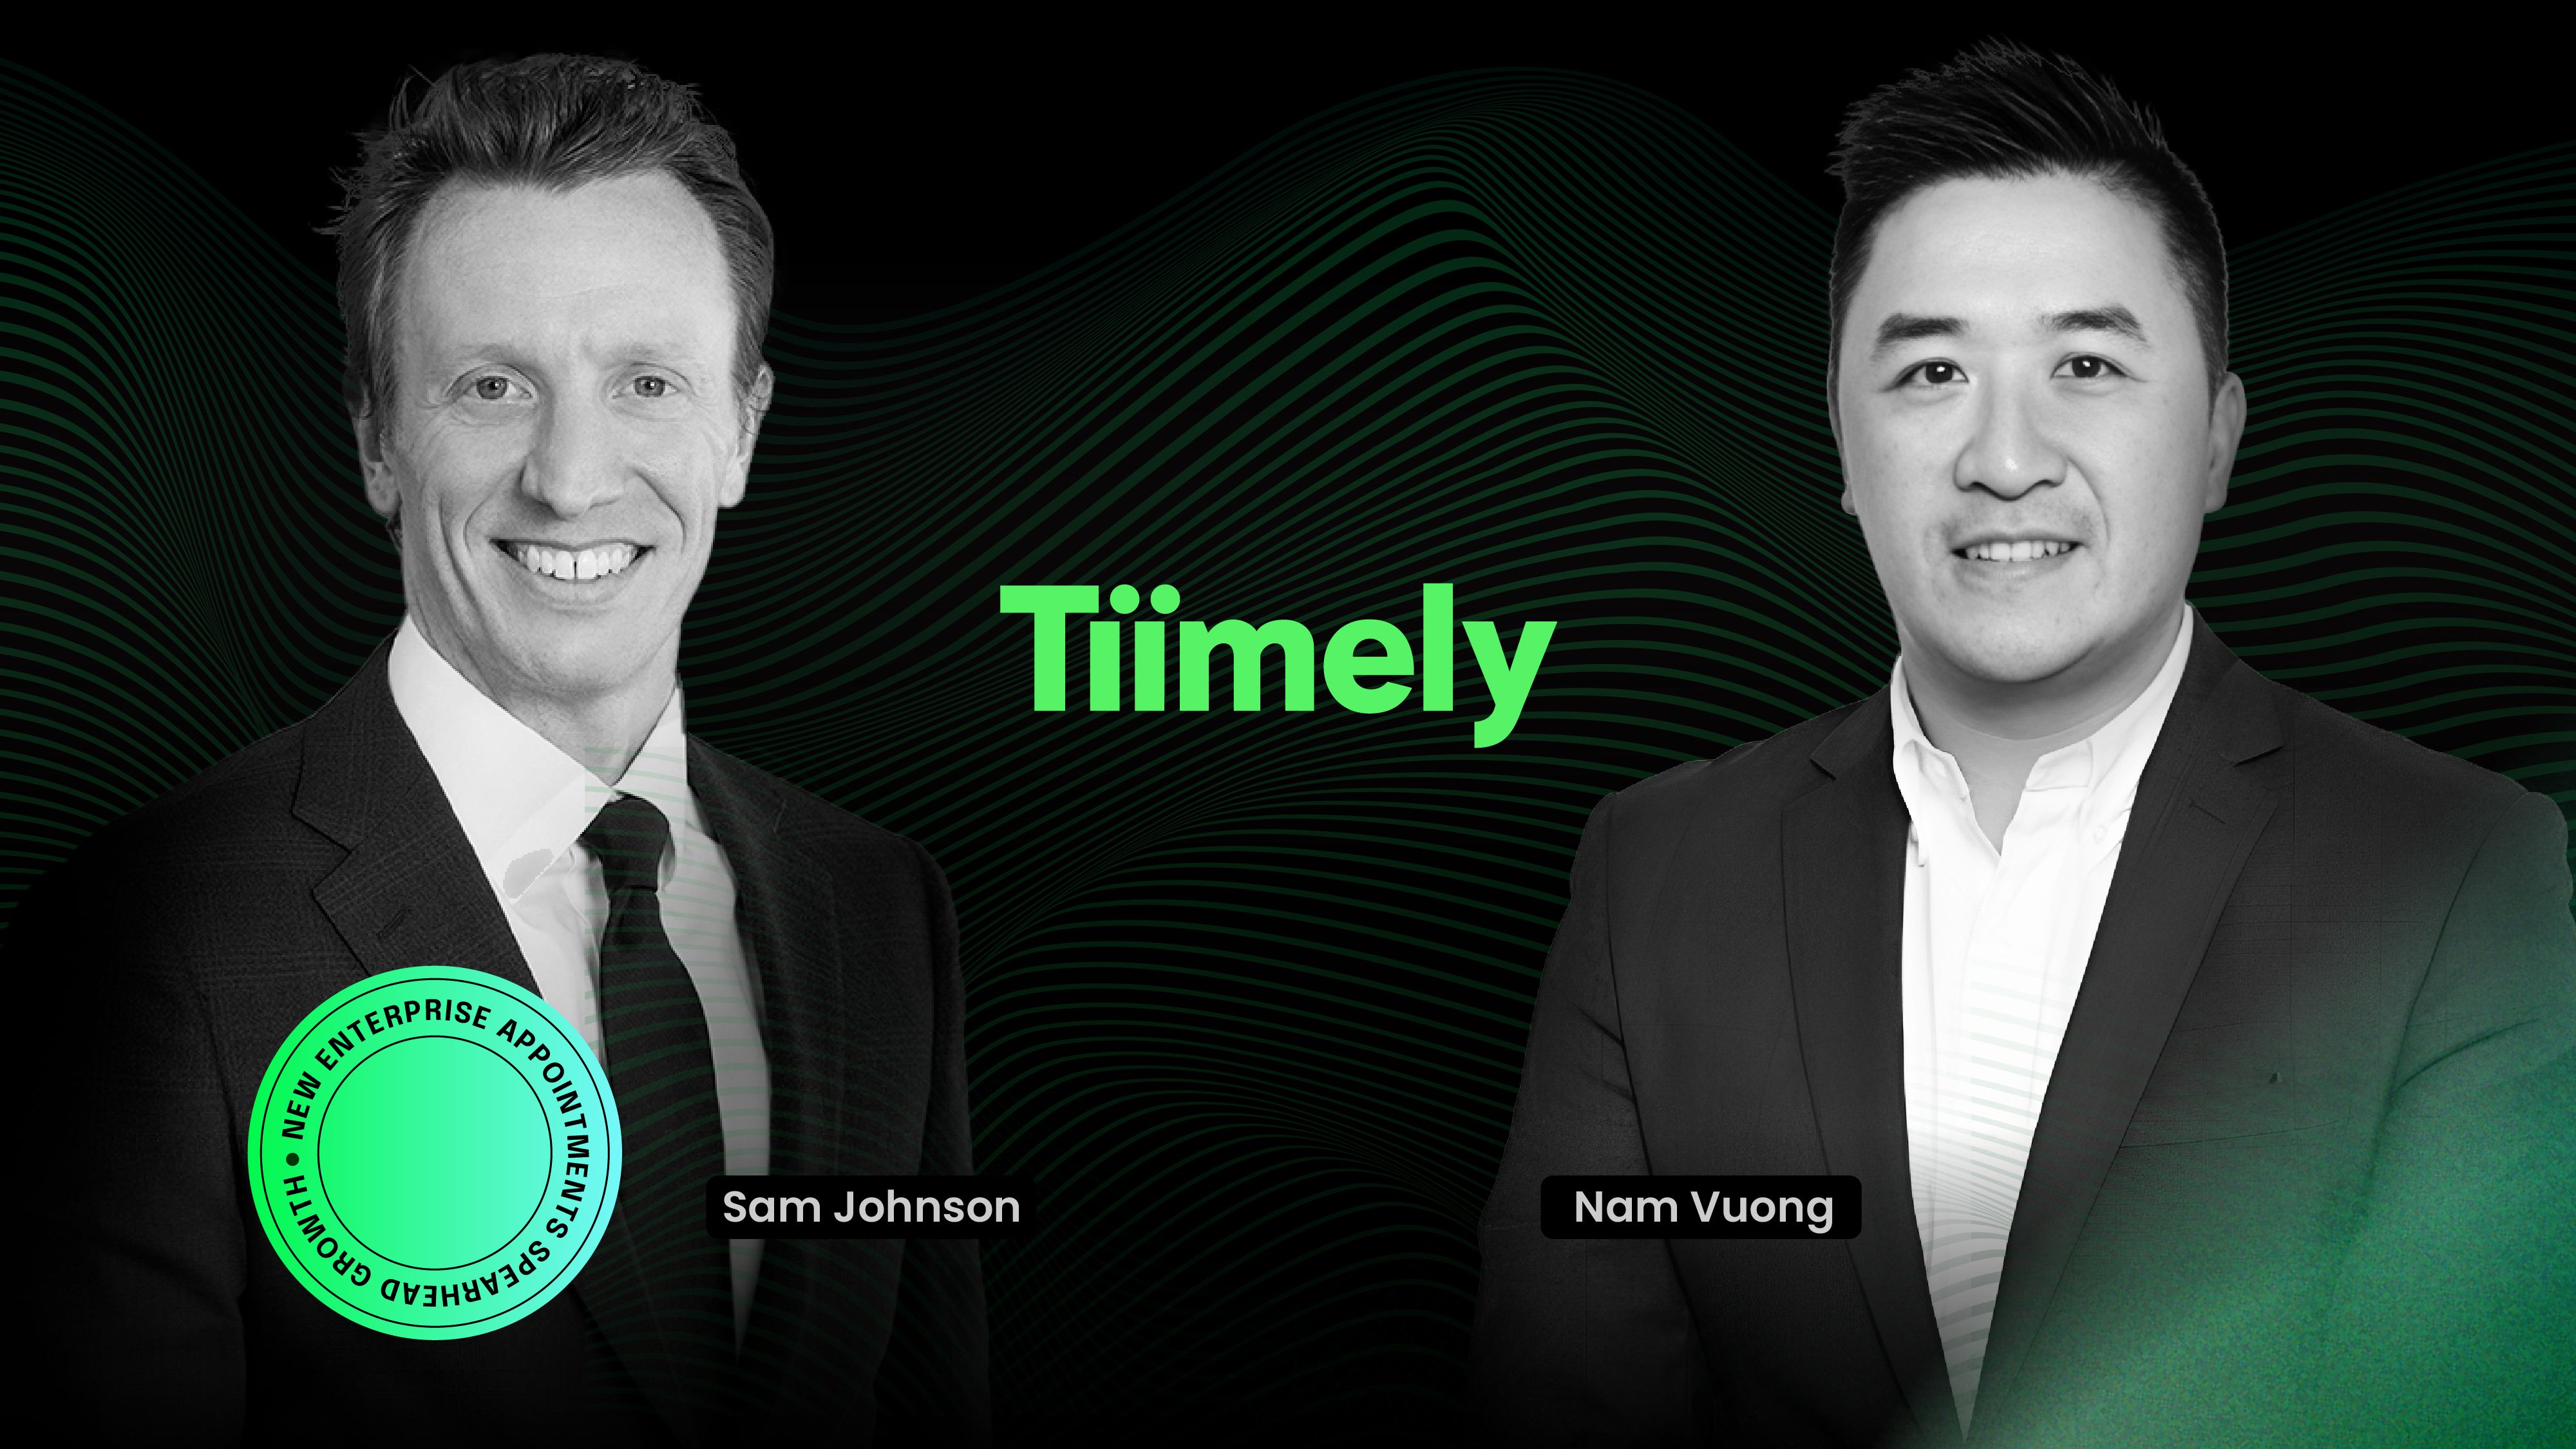 Tiimely Strengthens Enterprise Platform Growth with Key Sales Appointments